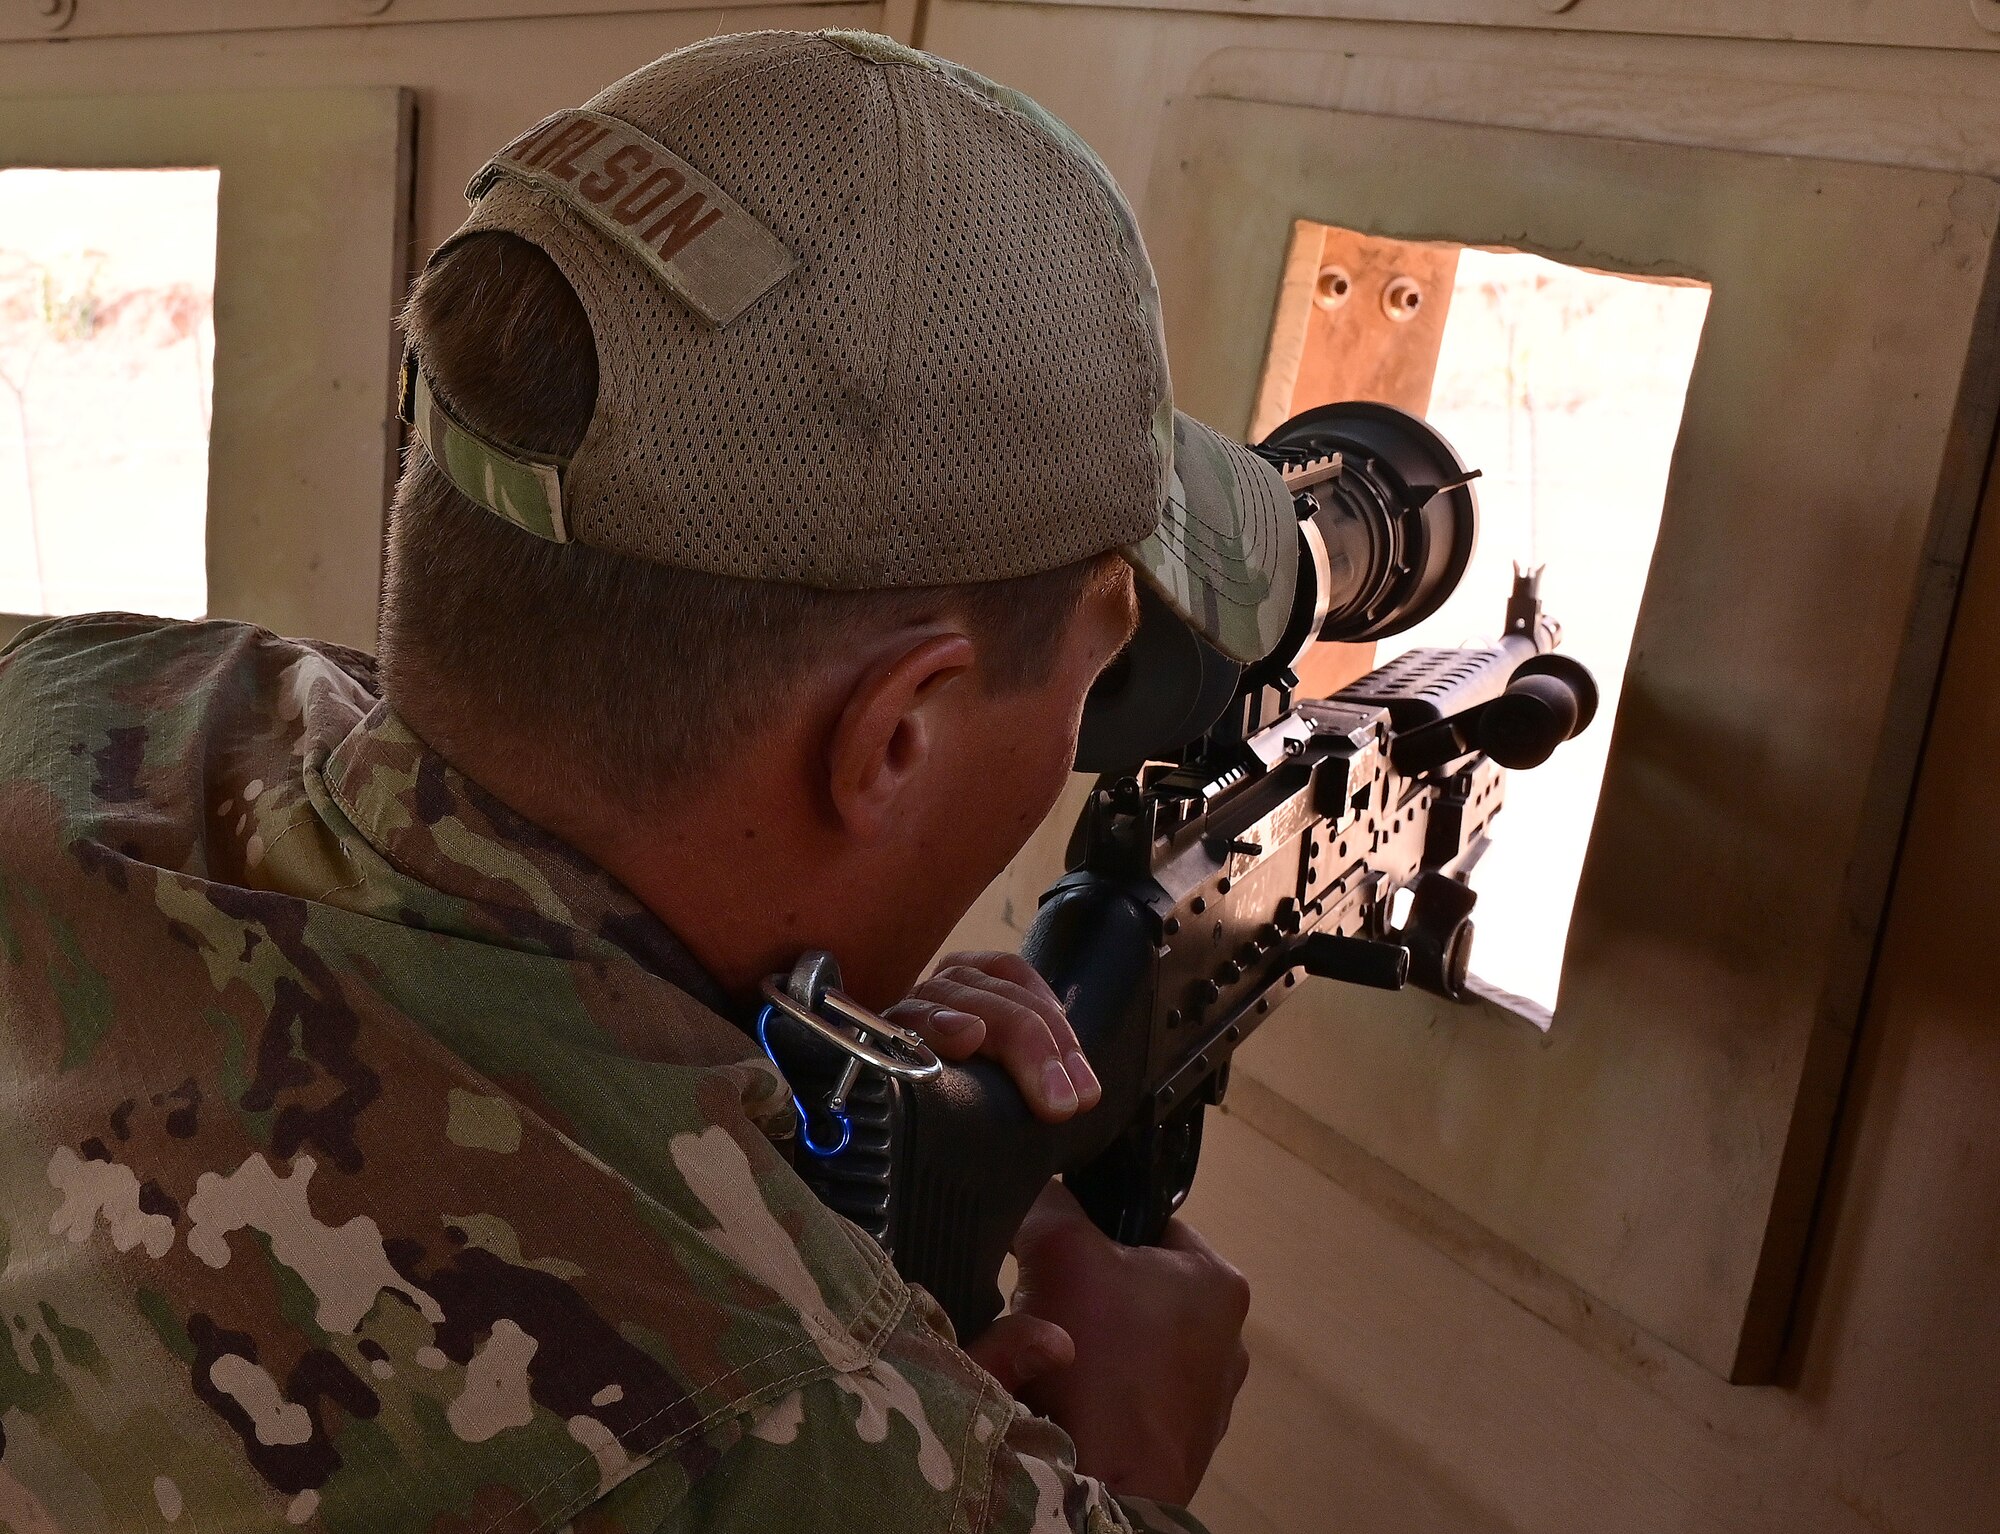 U.S. Air Force Tech. Sgt. Tyler Carlson, 409th Expeditionary Security Forces Squadron plans and programs, demonstrates the increased  visibility the updated firing port shields provide for the guard towers at Nigerien Air Base 201, Agadez, Niger,  Feb. 8, 2022. 

Four innovative Airmen developed tower modifications creating a better firing platform, increased field of view and a more comfortable work environment for Defenders. (U.S. Air Force photo by Tech. Sgt. Stephanie Longoria)